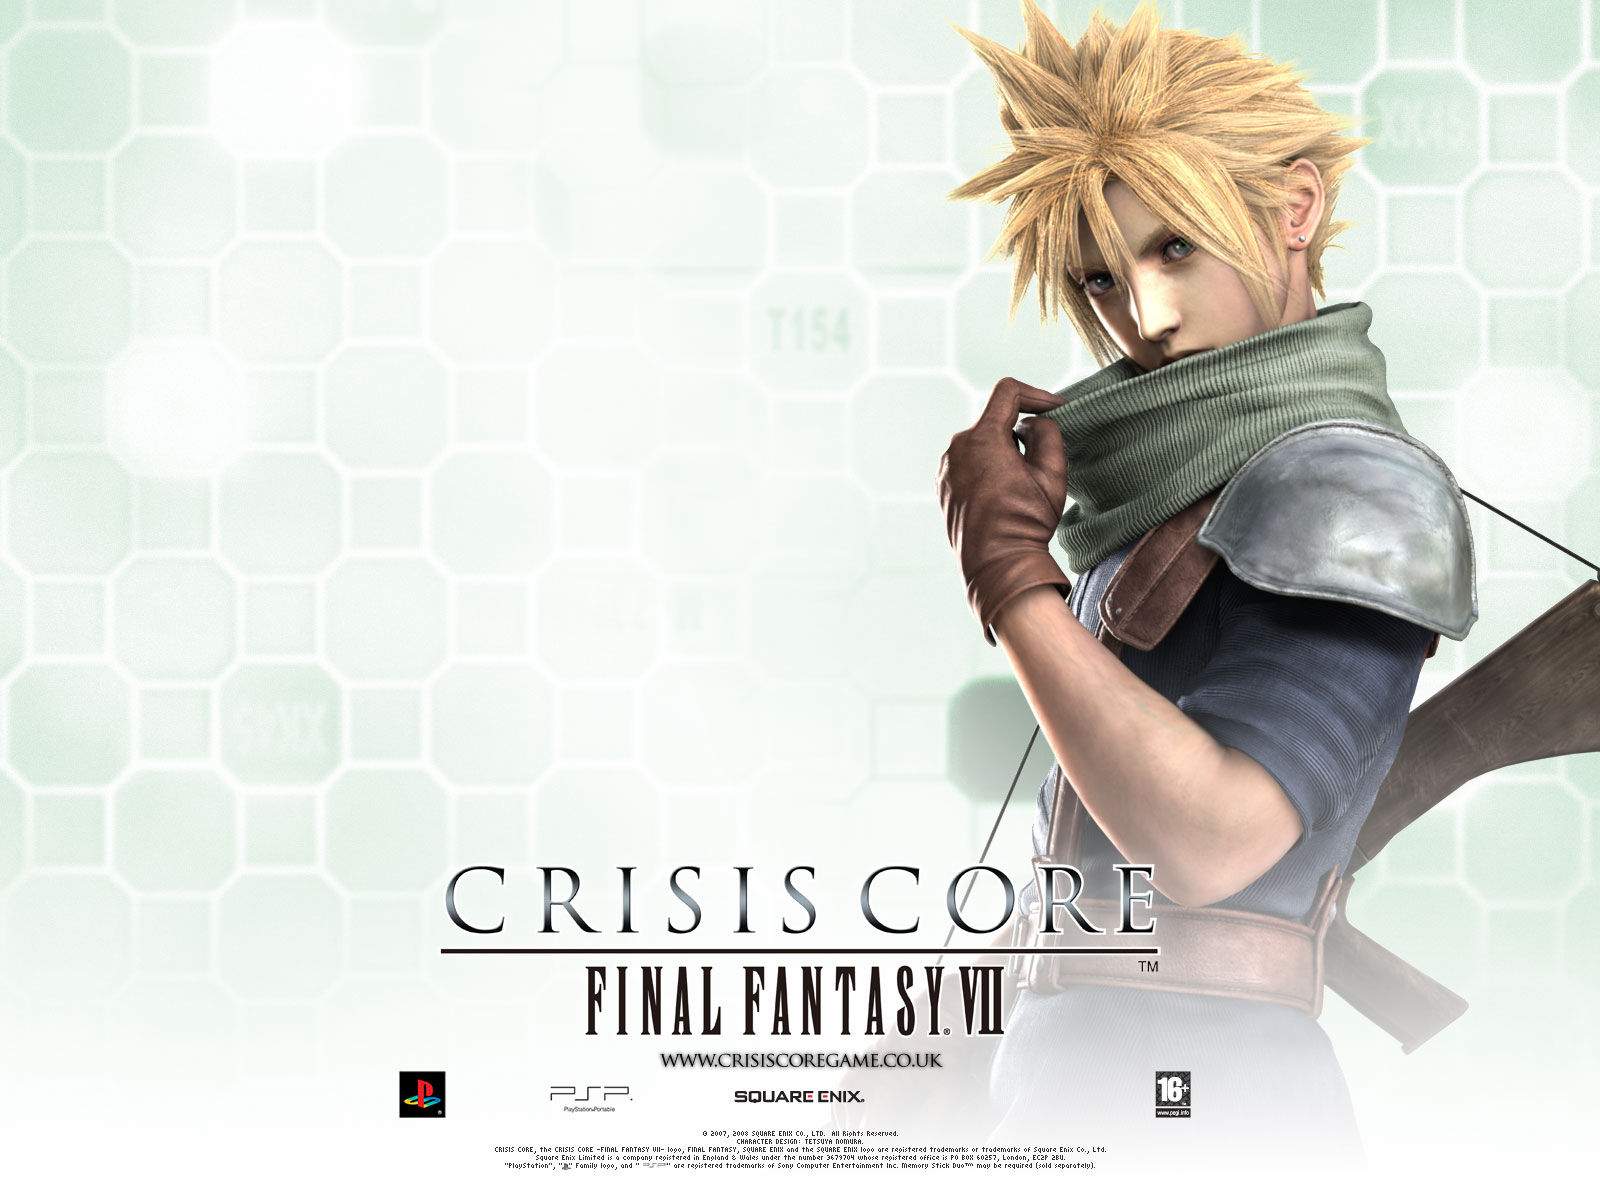 Wallpaper  Final Fantasy VII Zack Fair Cloud Strife Sephiroth video  games Video Game Art video game characters sword gloves water drops  3840x2160  SpanishGirl  2205771  HD Wallpapers  WallHere